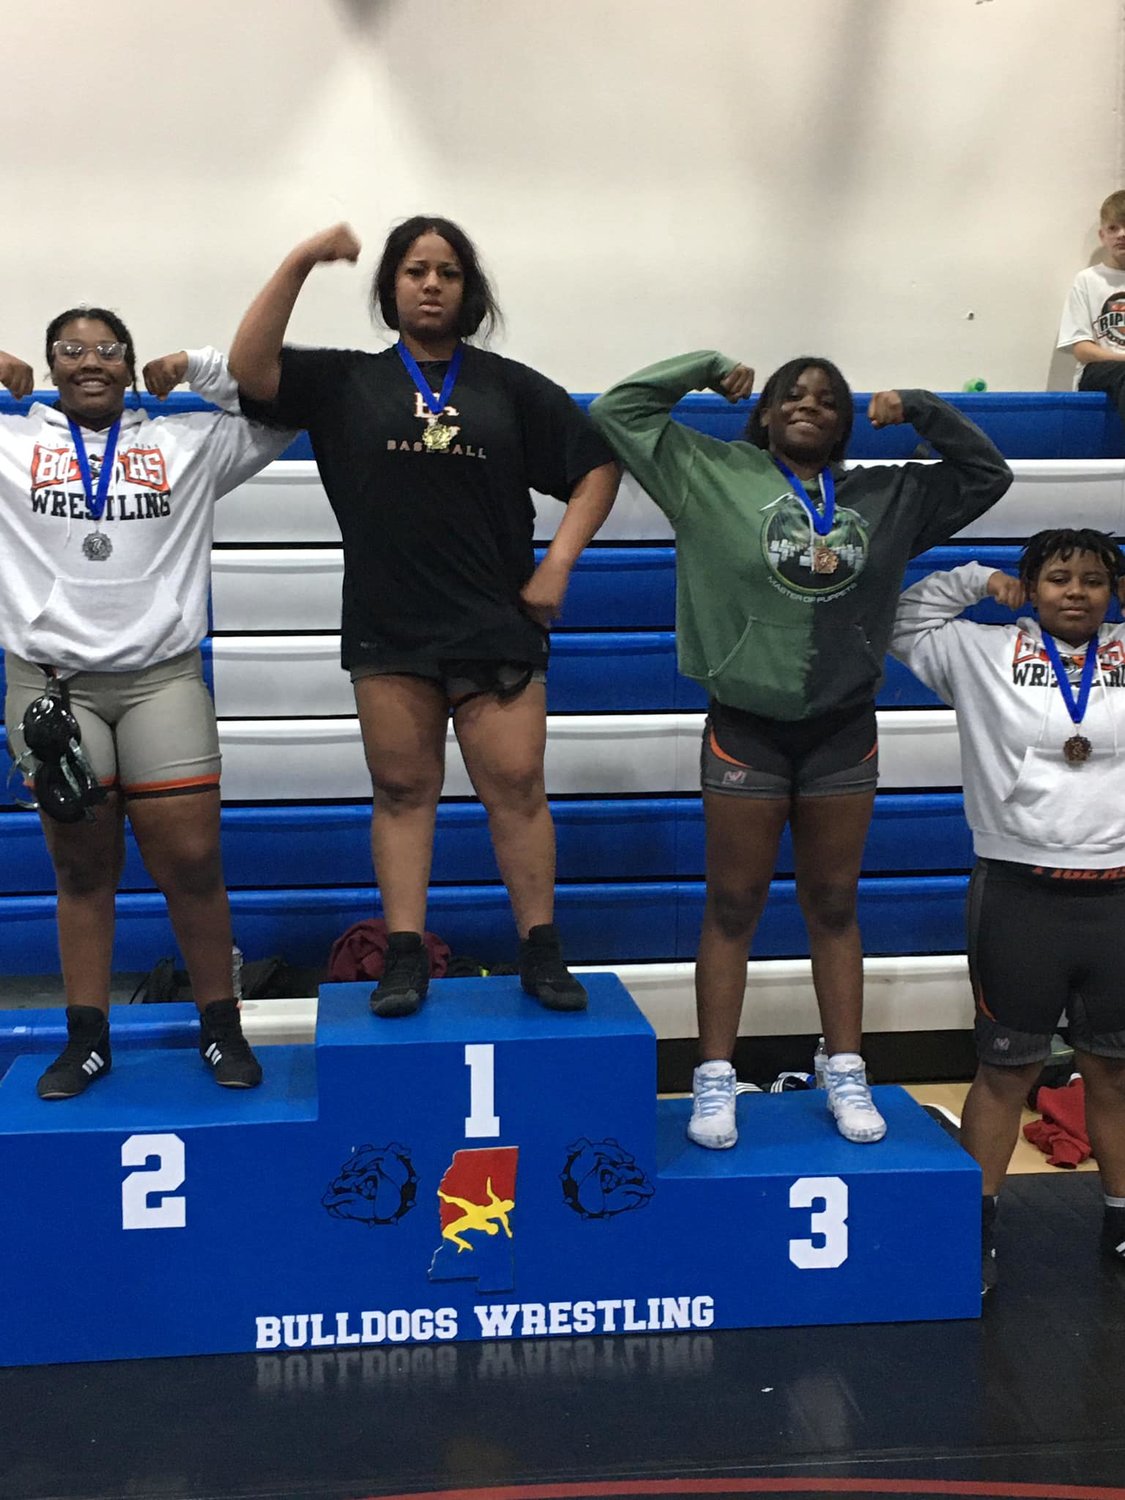 Baldwin County wrestlers swept the top four spots of the 235-pound varsity division from the Bulldog Brawl in Vancleave, MS last Friday, Dec. 16. Tamara Reed won the bracket in front of Meagan Portis in second, Jessinia Jones in third and Ameria Brooks in fourth.